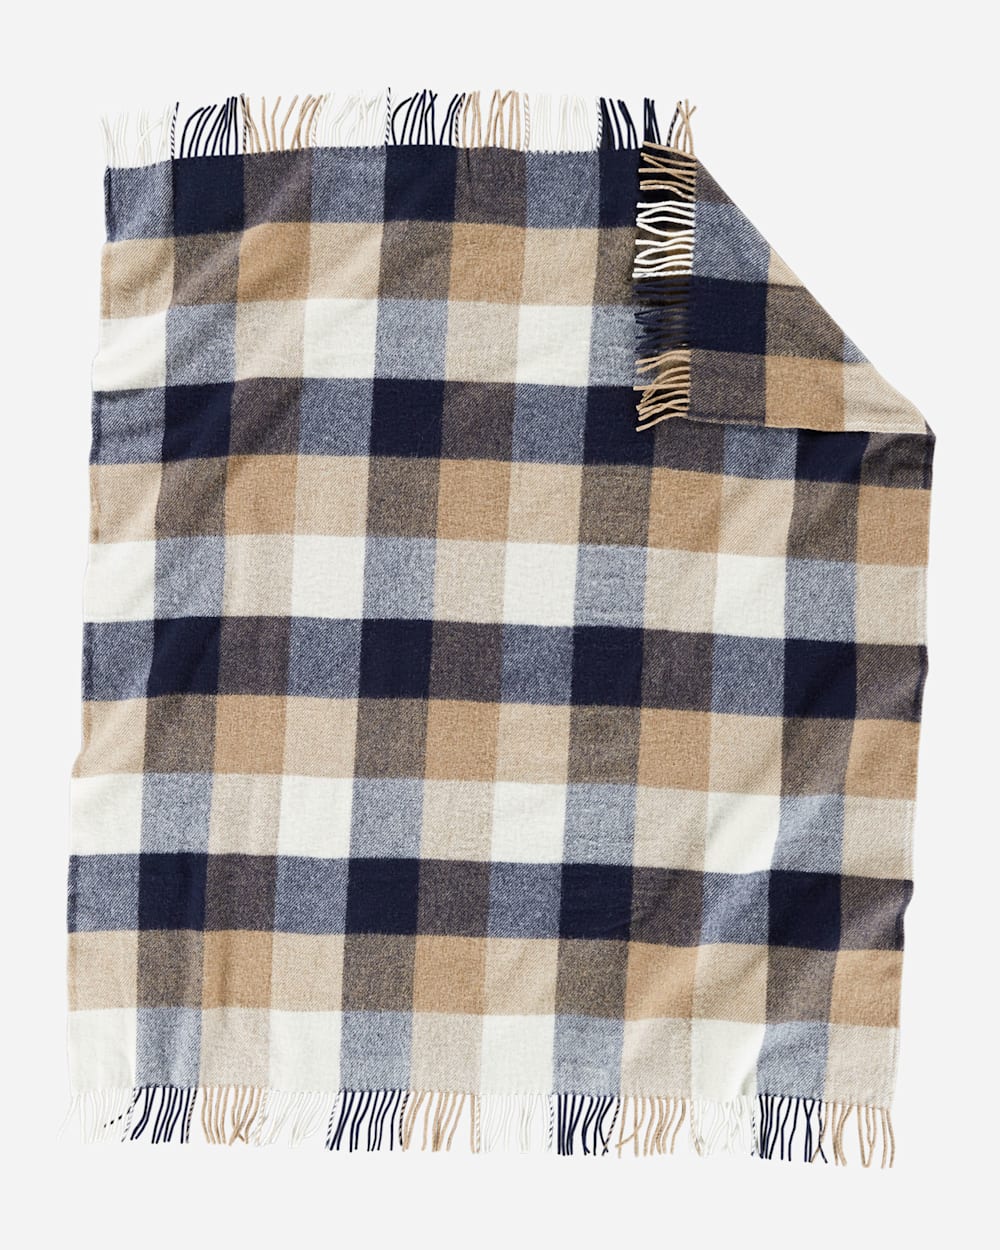 ALTERNATE VIEW OF ECO-WISE WOOL FRINGED THROW IN NAVY/CAMEL image number 2